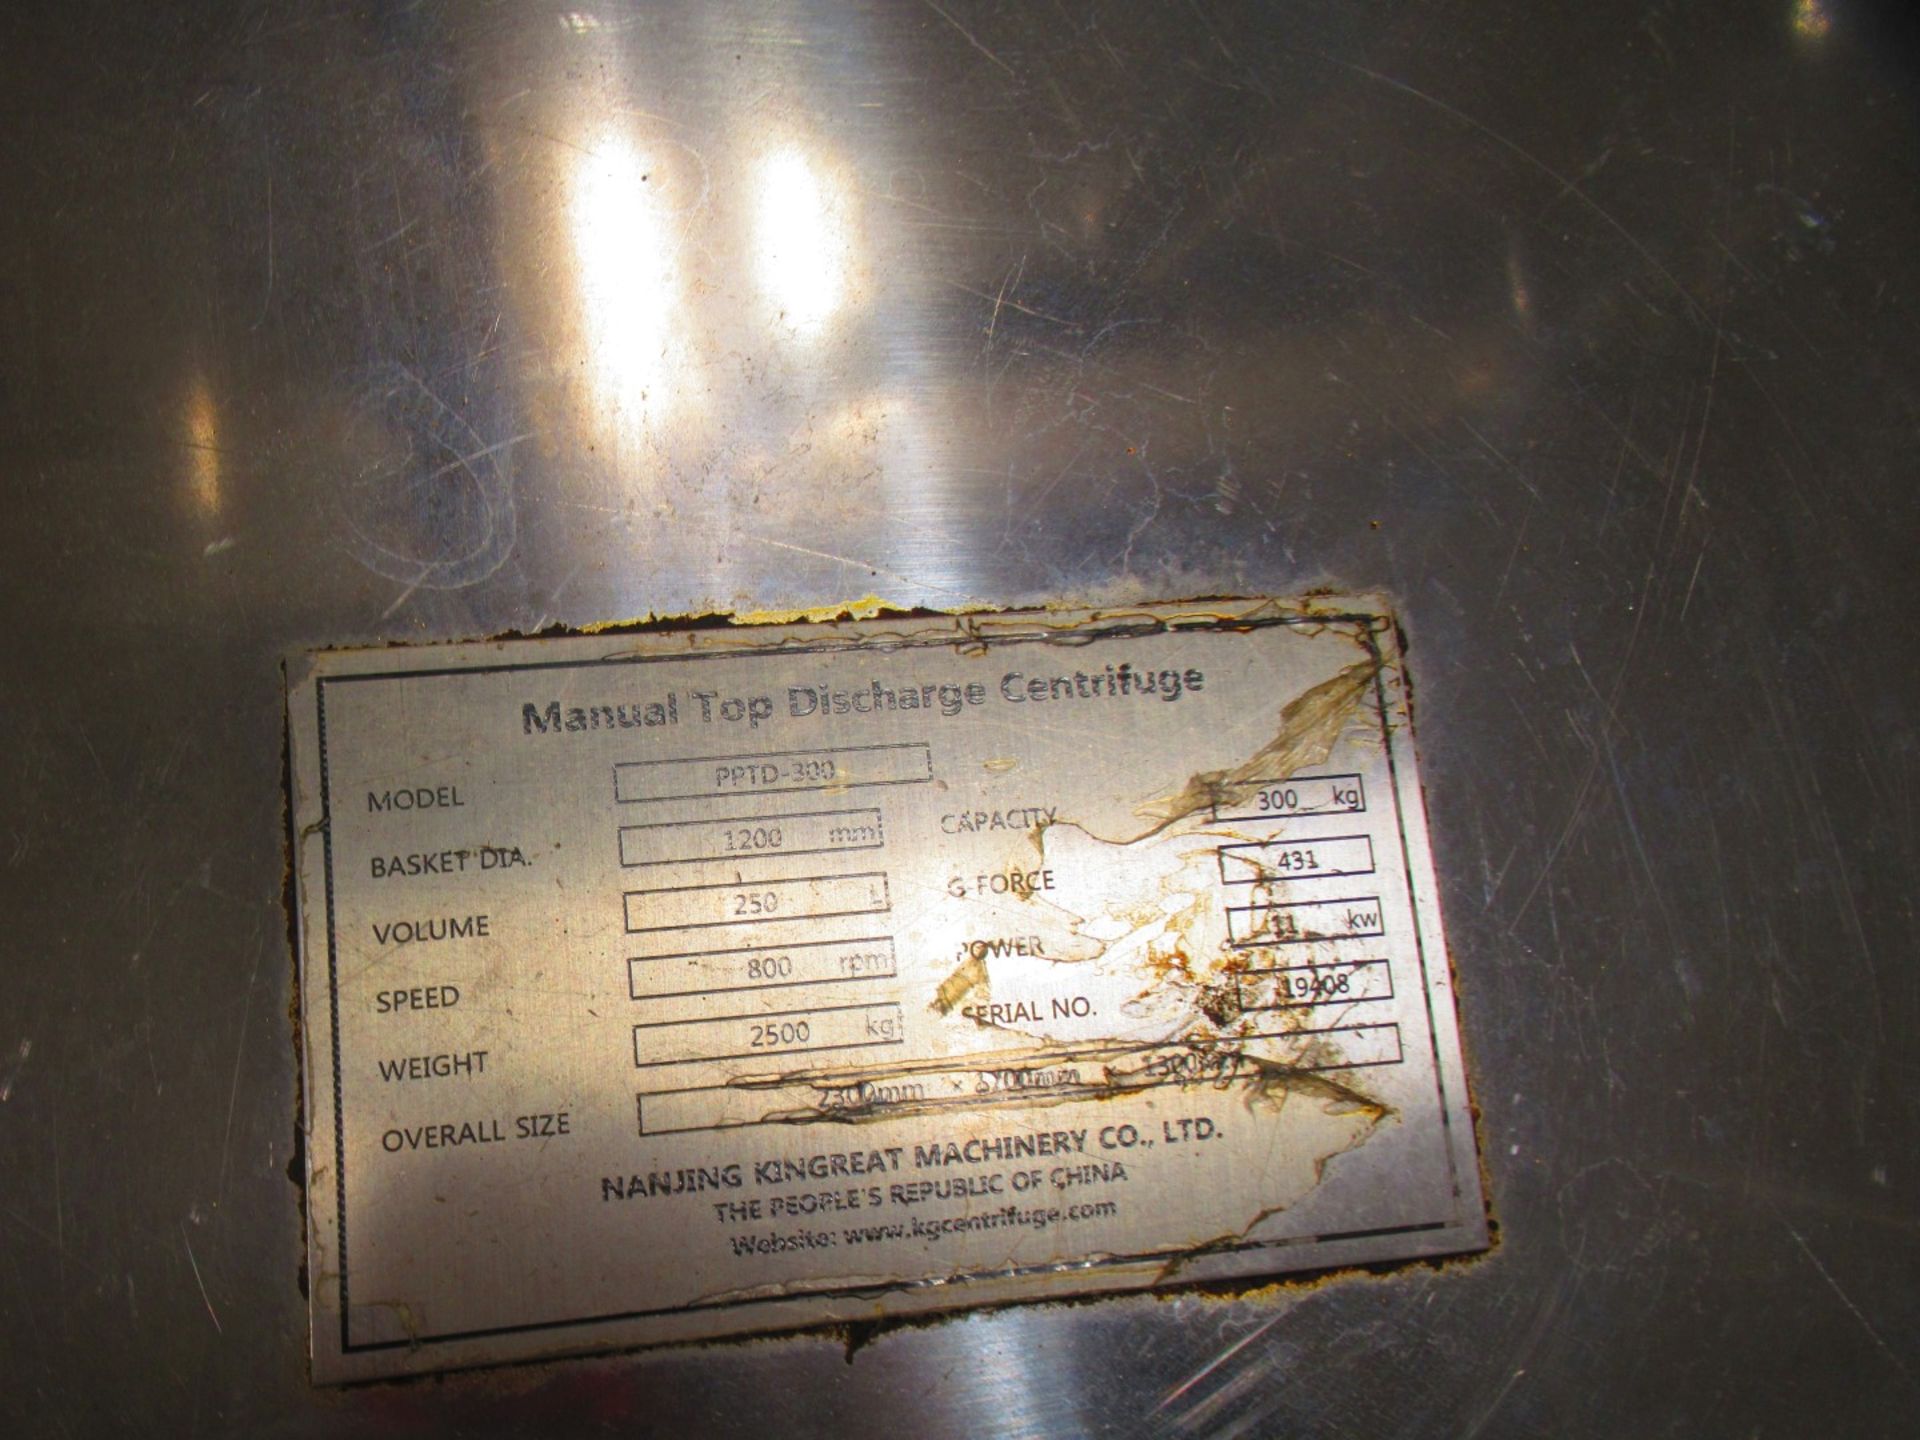 Manual Top Discharge Centrifuge - Image 10 of 10